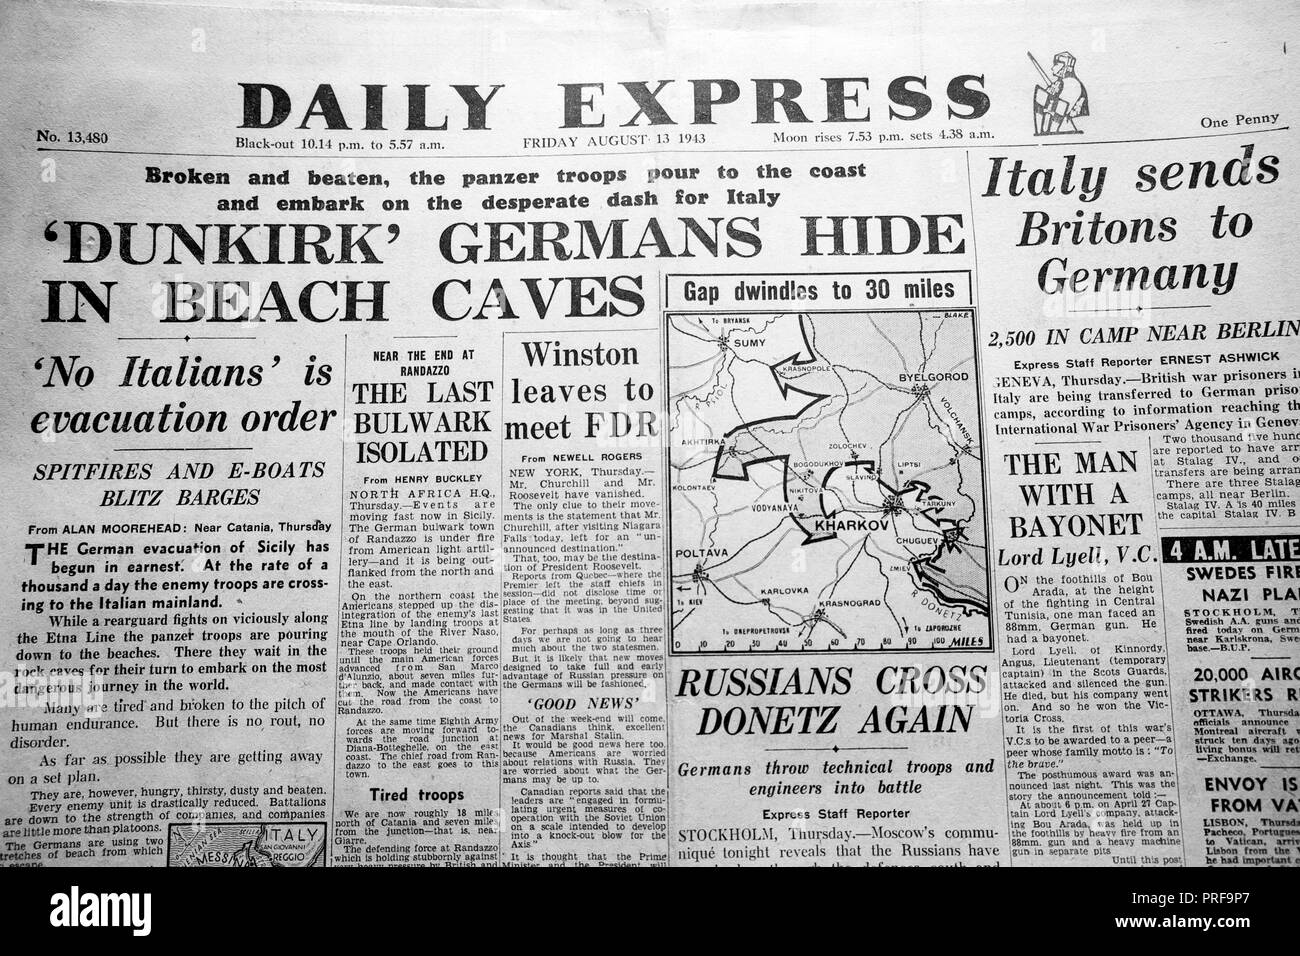 1943 daily express front page Black and White Stock Photos & Images - Alamy